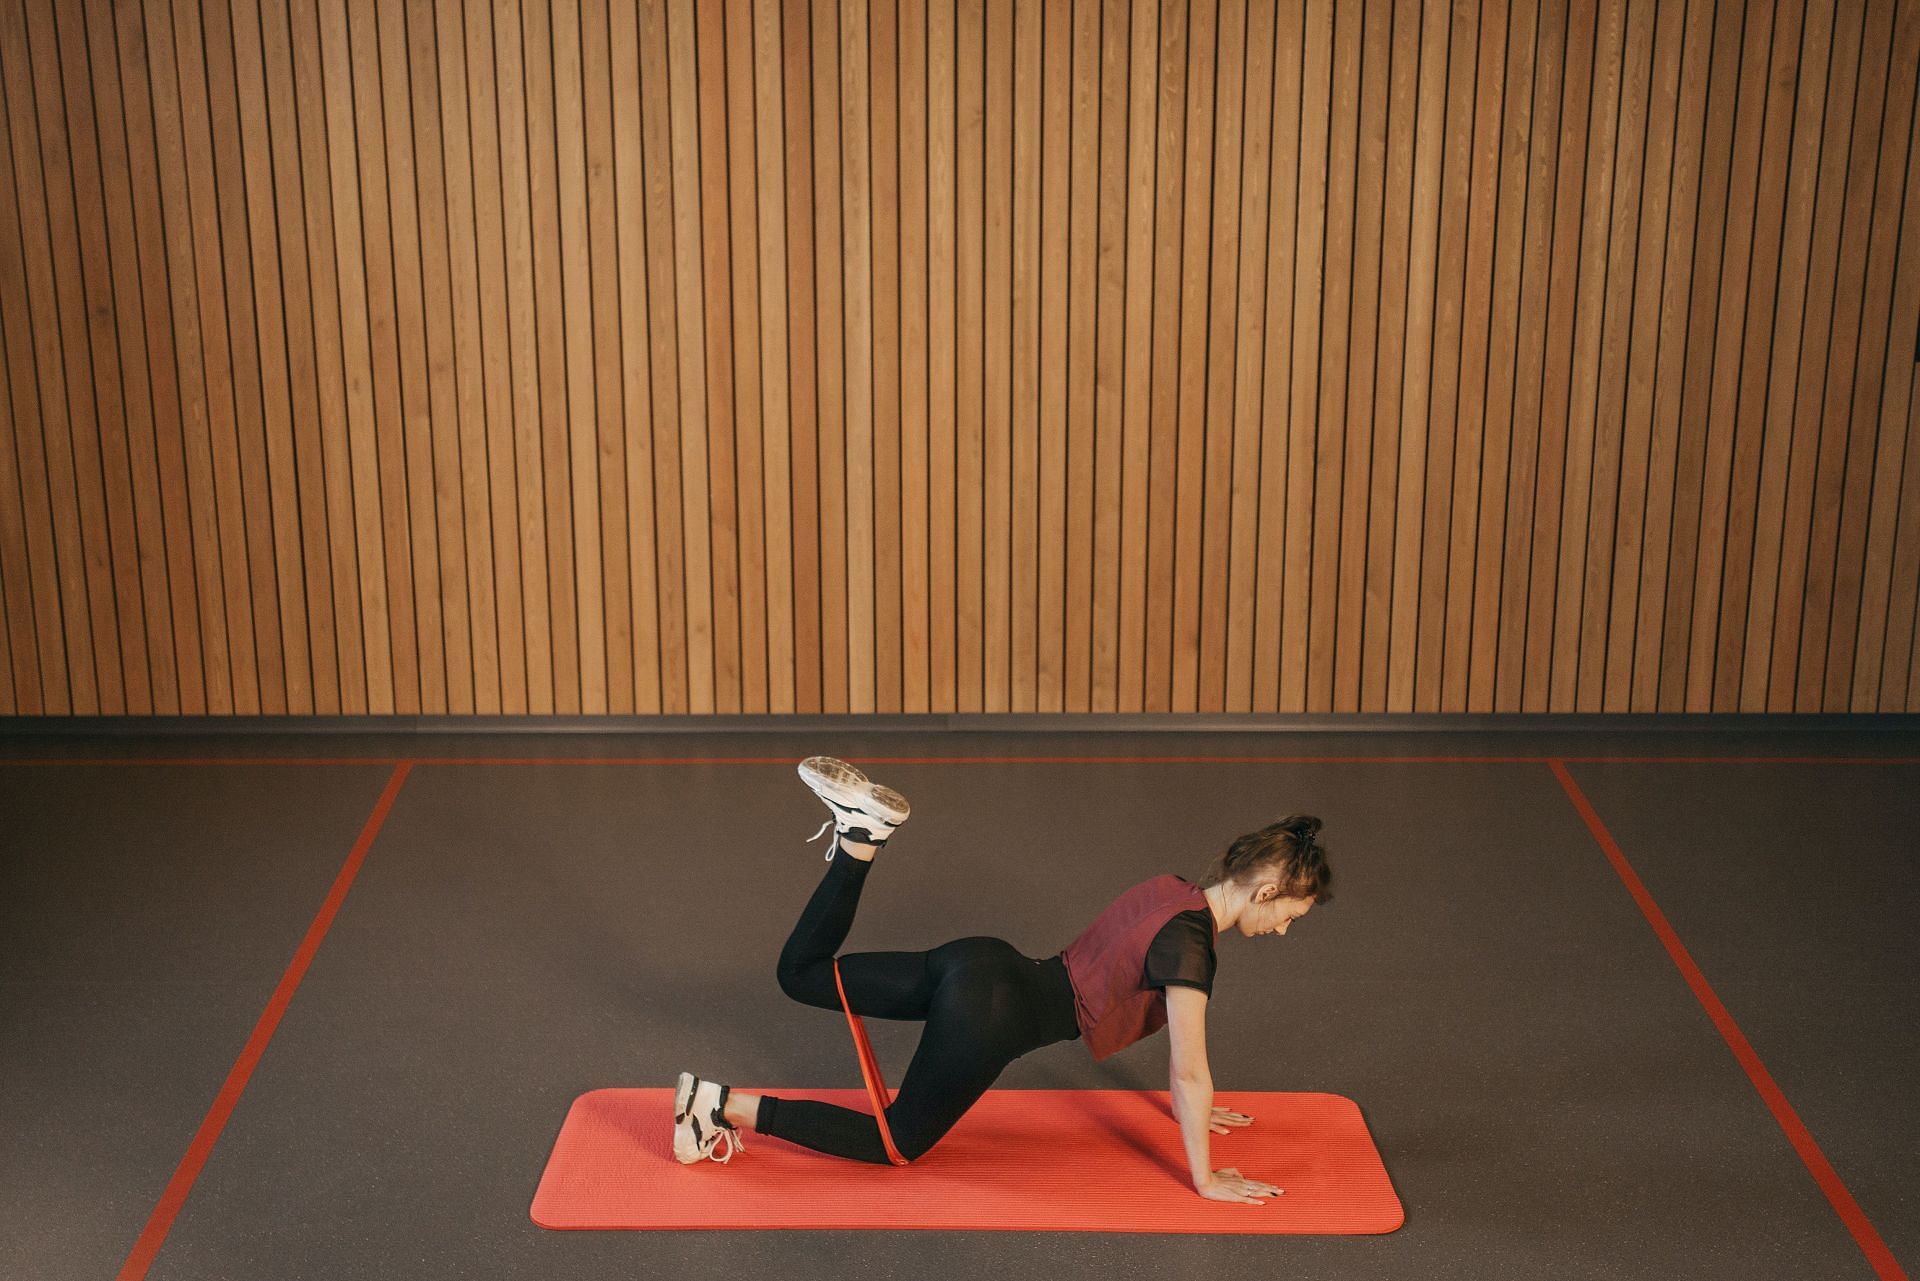 Hip adduction exercises are a type of strength training that targets the muscles on the inside of your thigh, known as the adductor muscles. (Photo by Pavel Danilyuk/pexels)